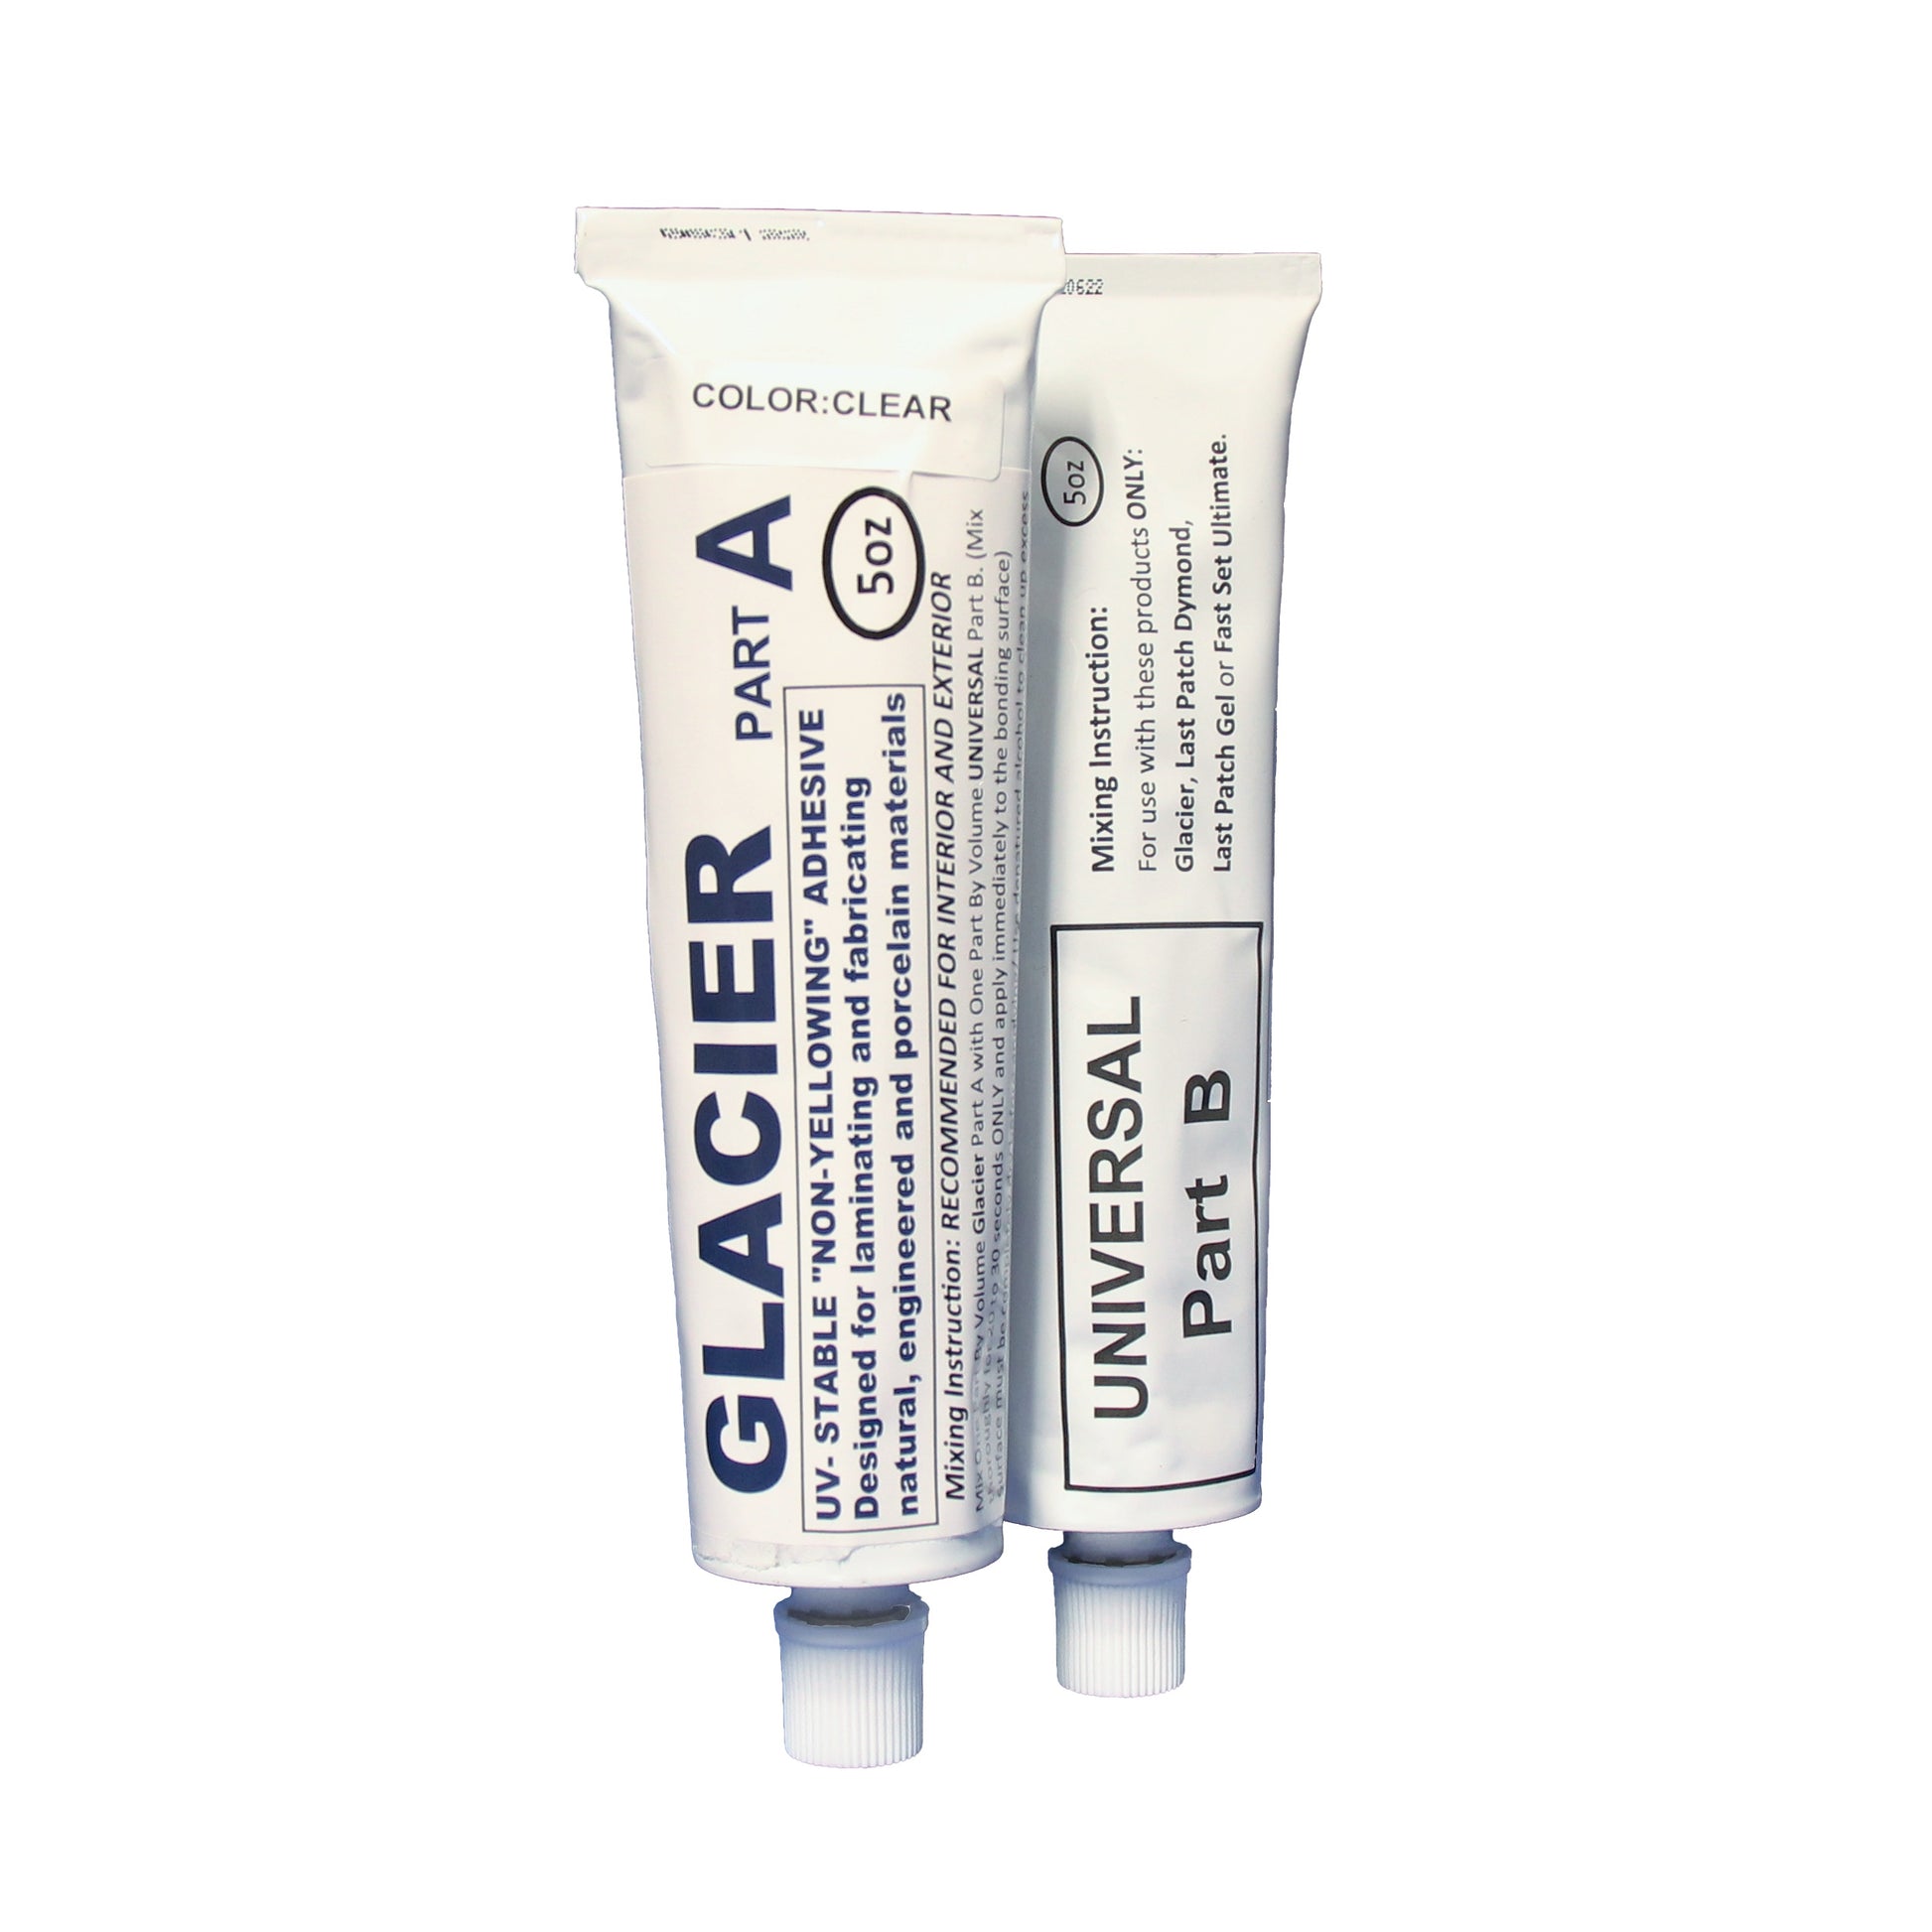 uv glue products for sale